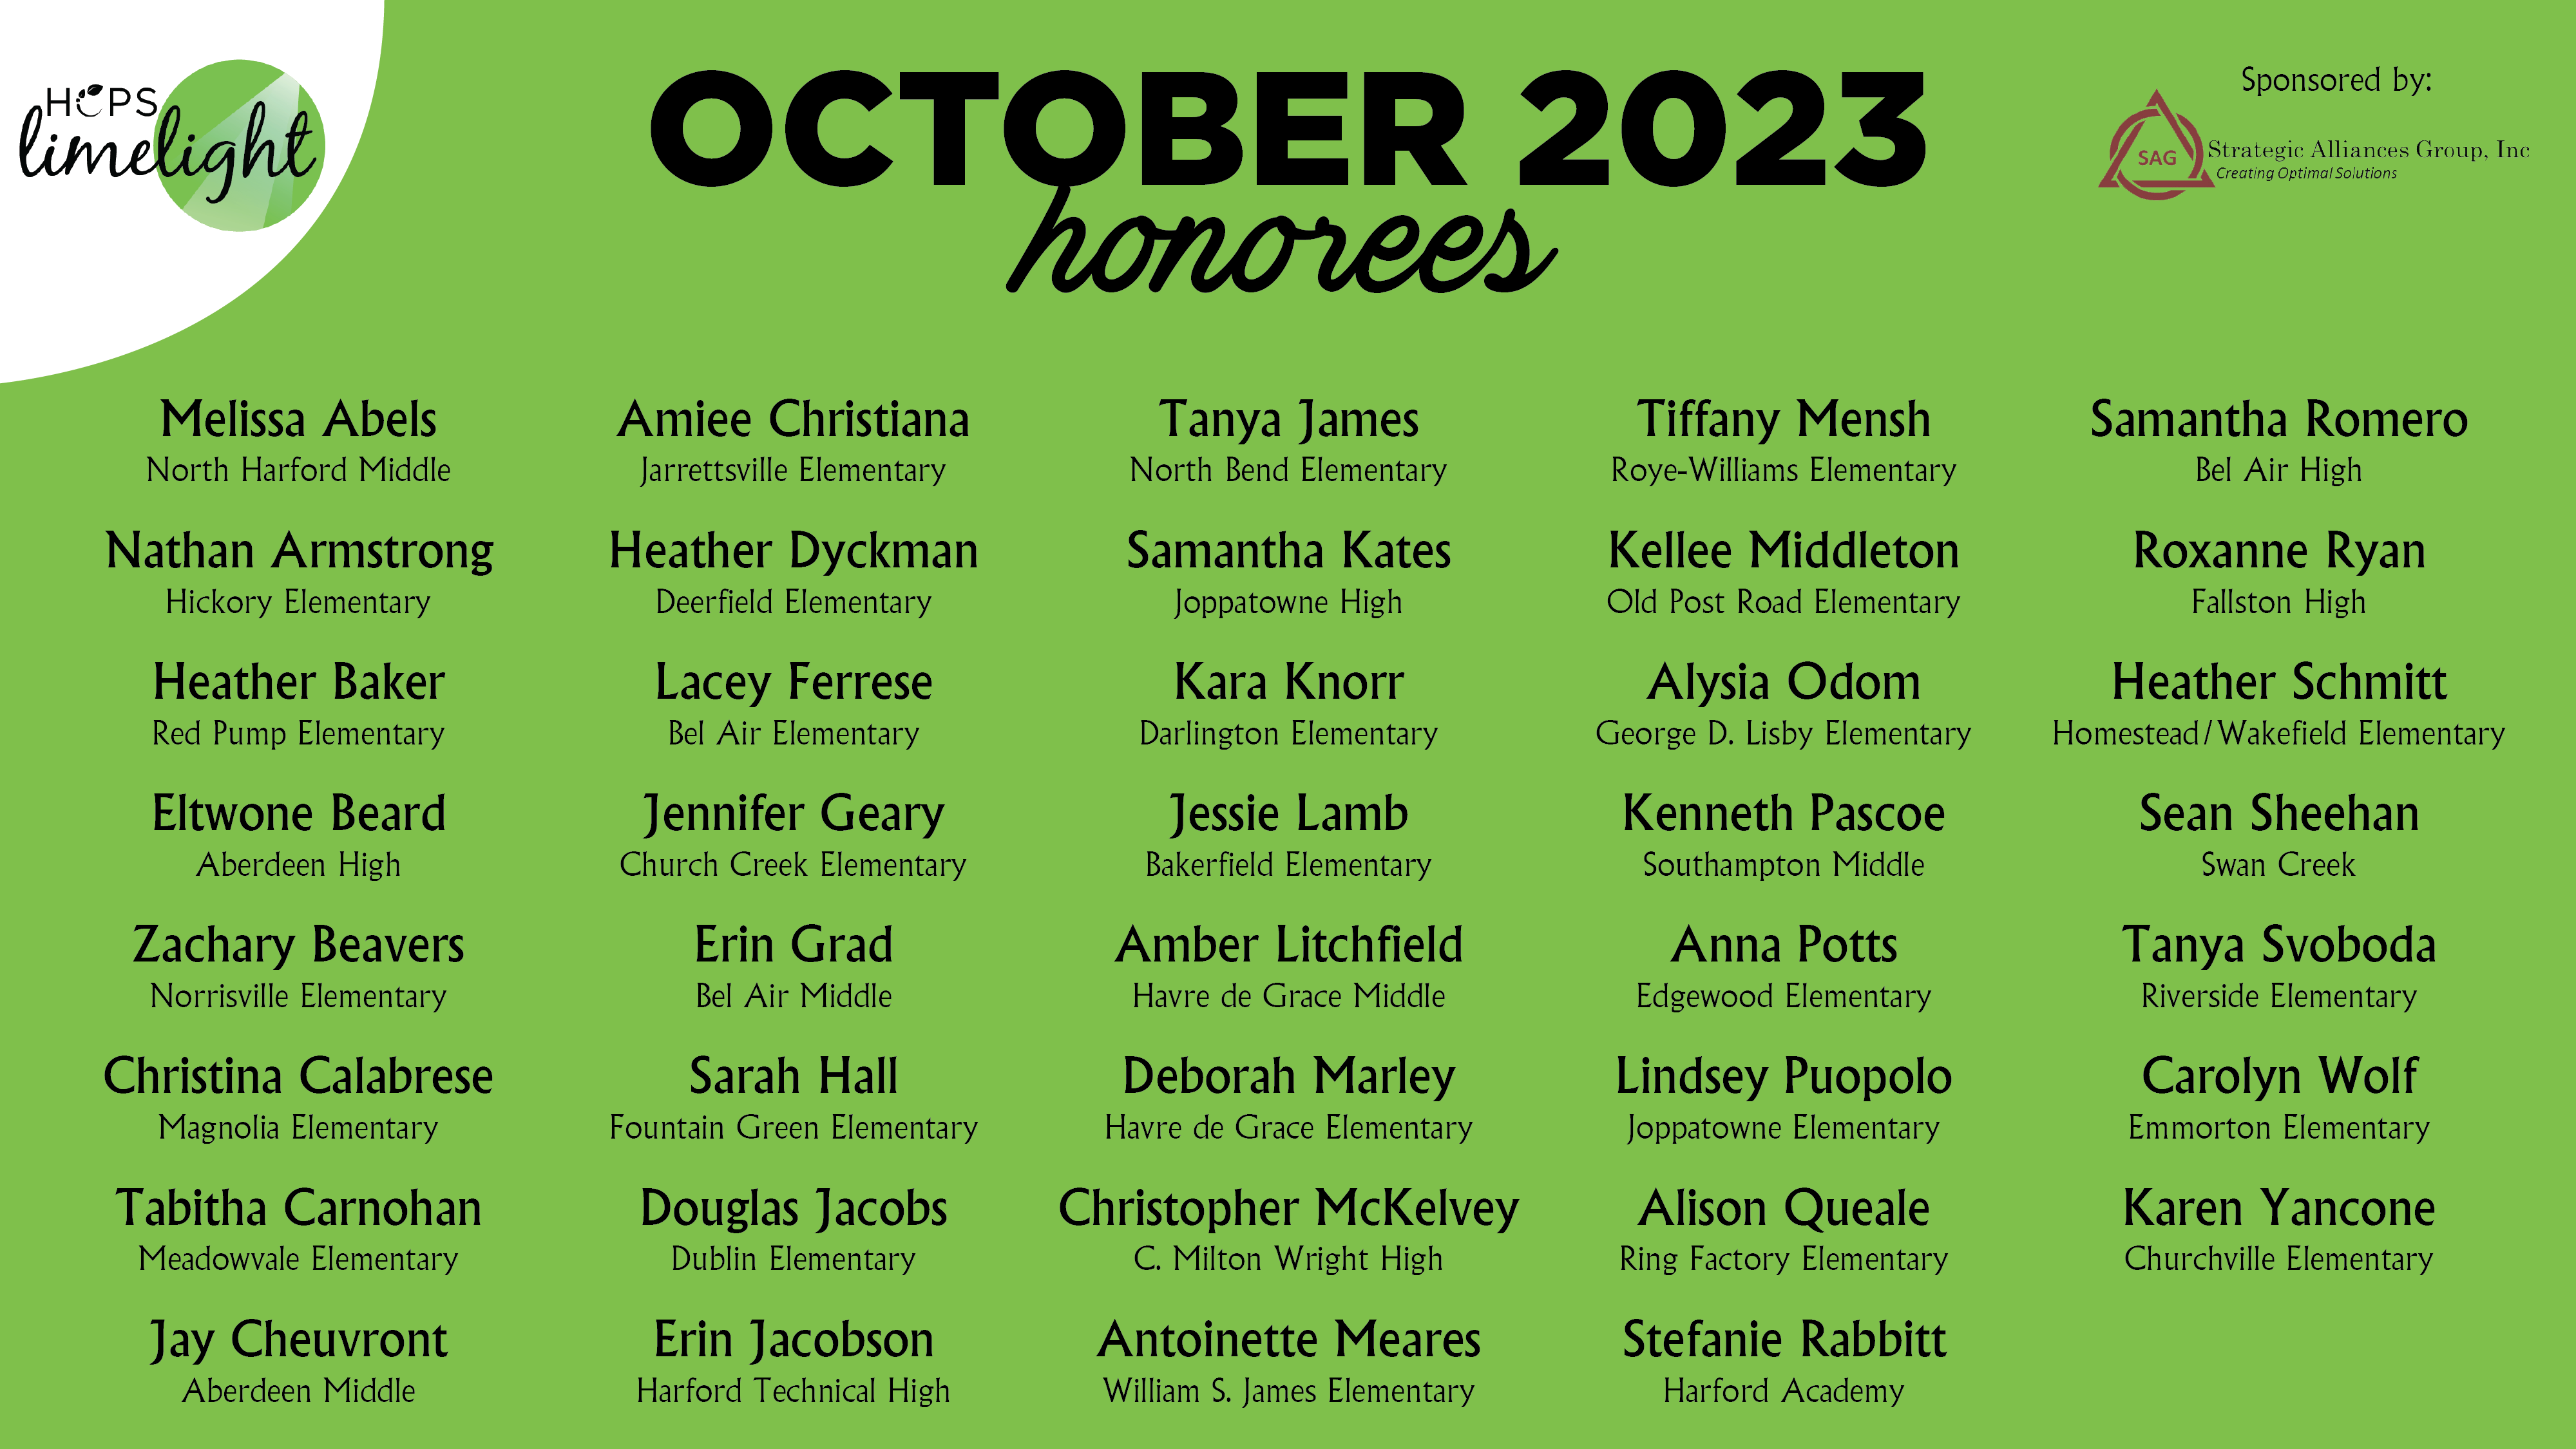 HCPS Limelight Honorees - October 2023